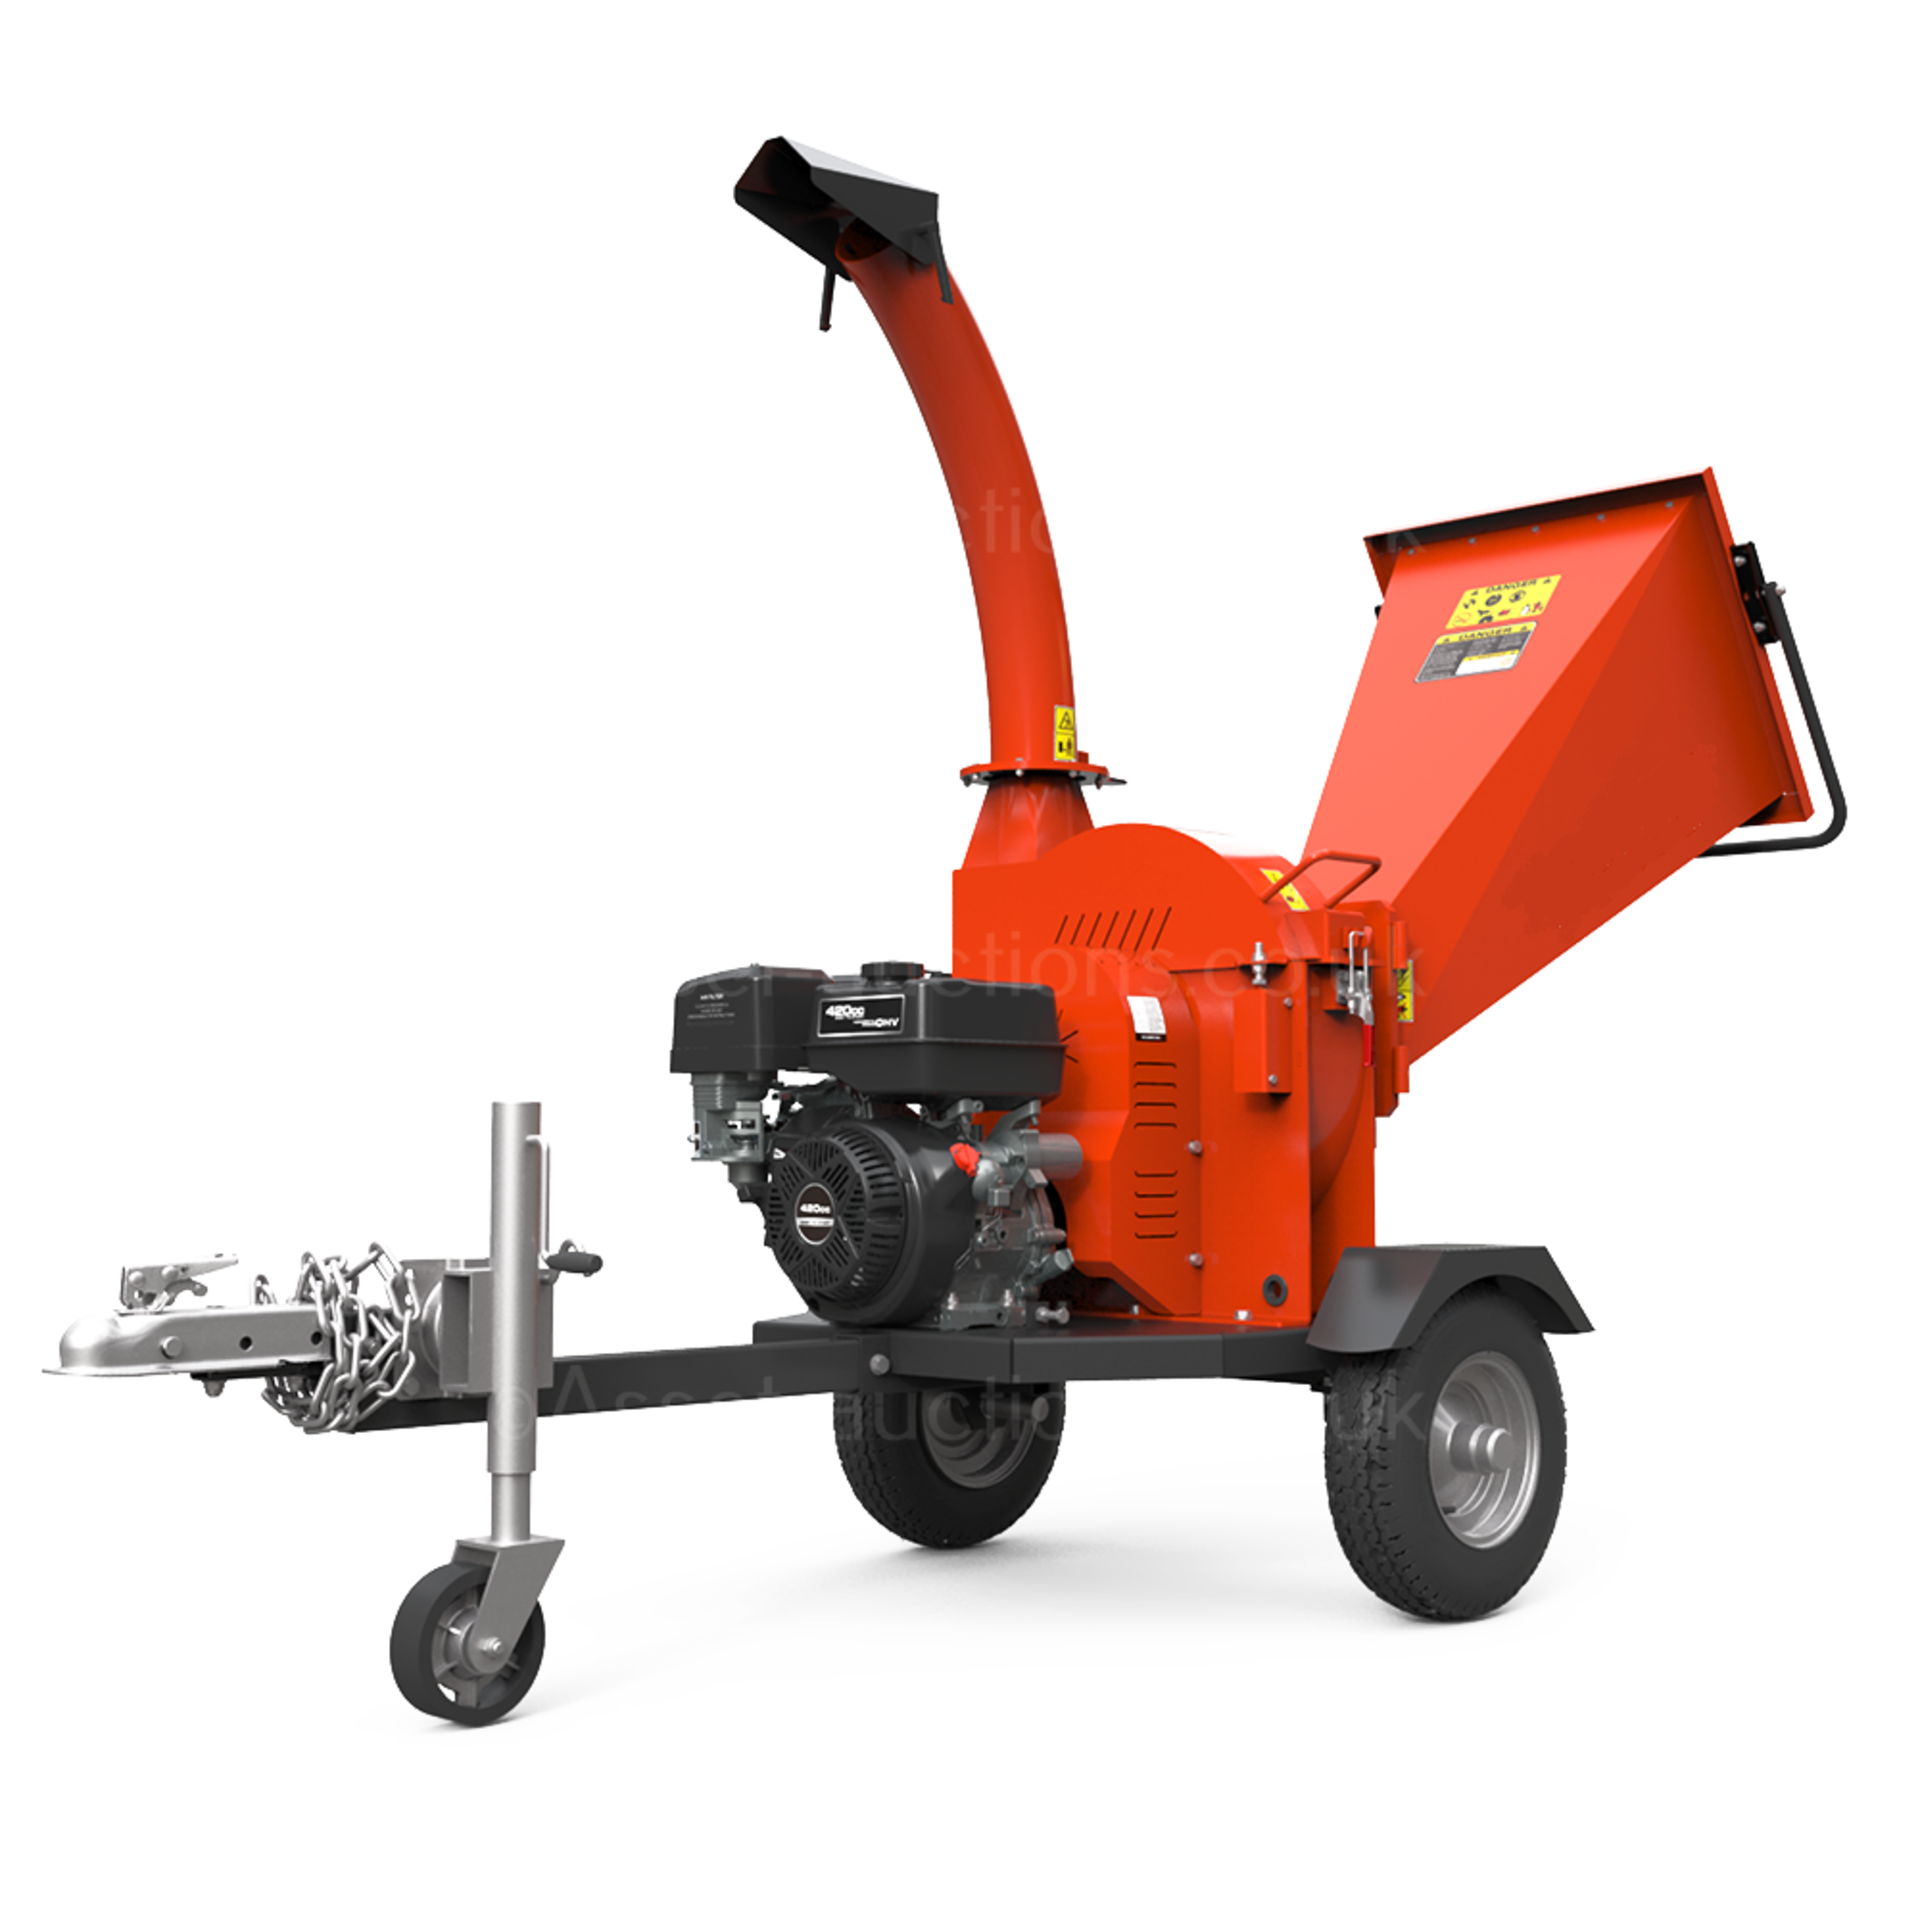 BRAND NEW AND UNUSED DGS1500 420CC 4.5” TOWABLE PETROL WOOD CHIPPER *PLUS VAT* - Image 6 of 11